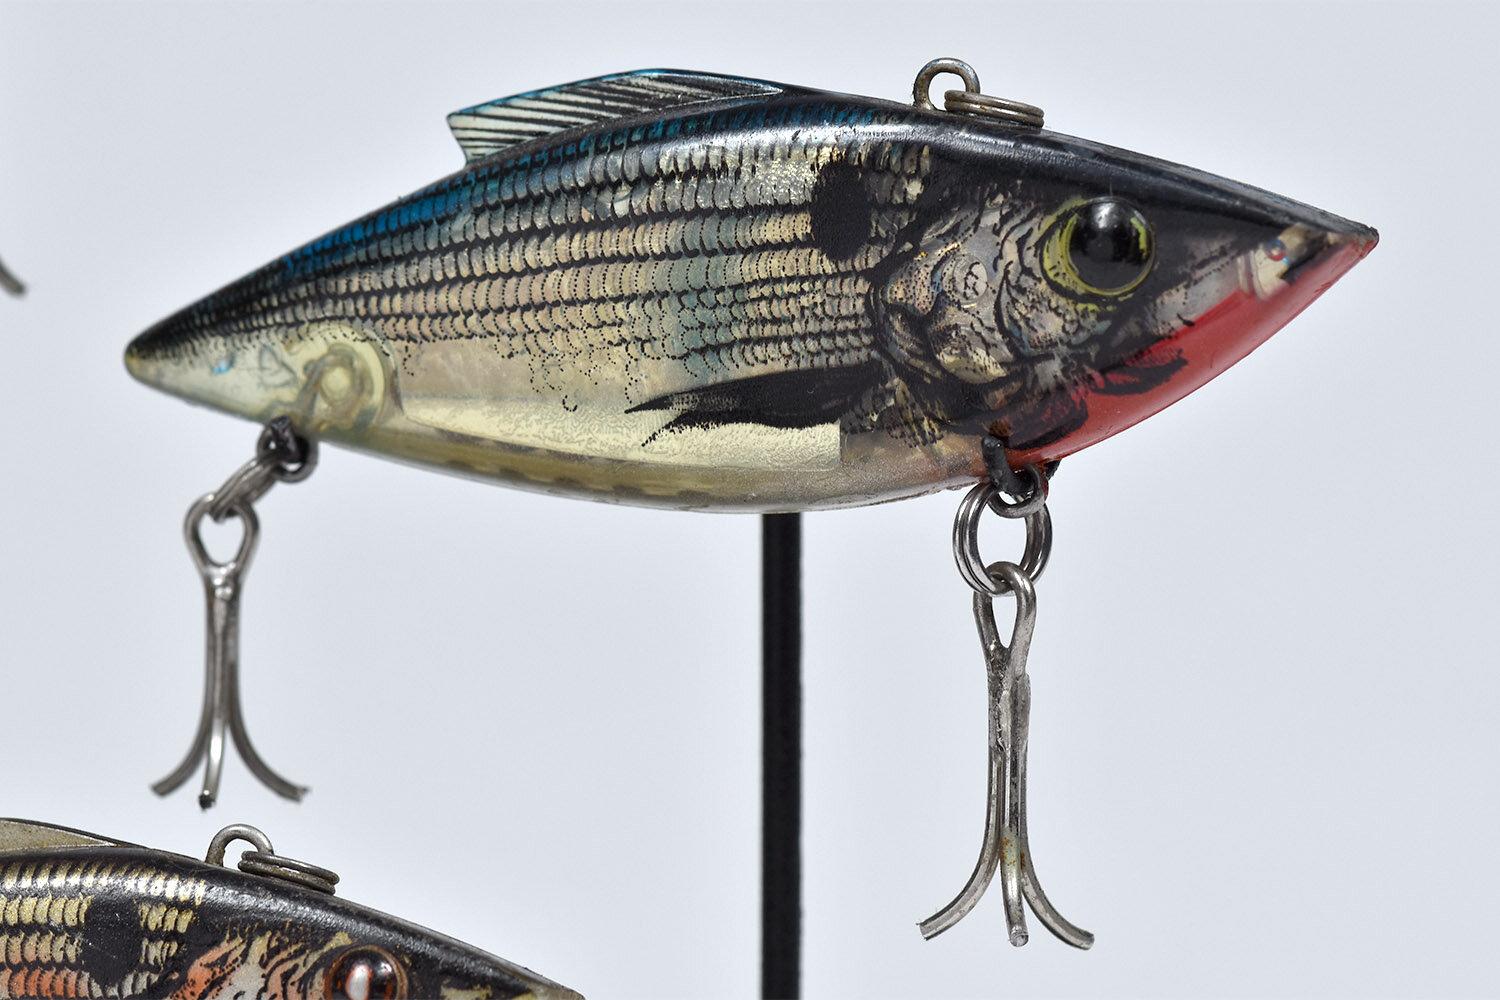 Machine-Made Group of Five Freshwater Fishing Lures Collected from Lake Tahoe, California